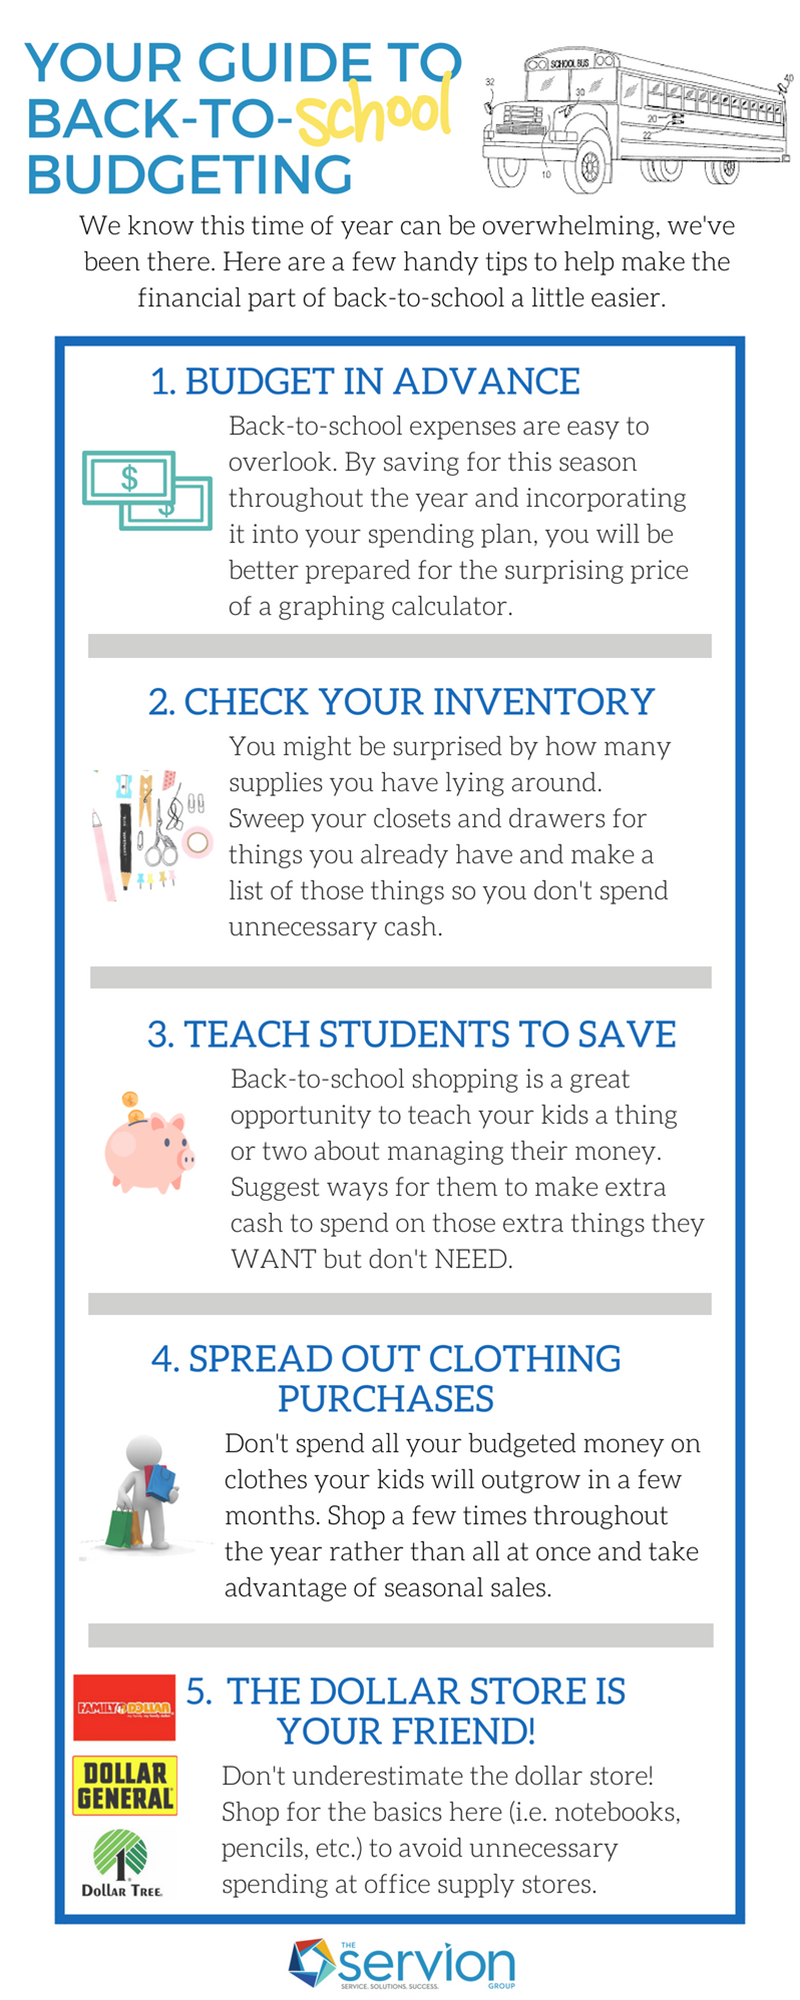 Back 2 School: Make Your College Budgeting Life Easy with These 4 Tips -  Auburn Savings Bank, FSB.